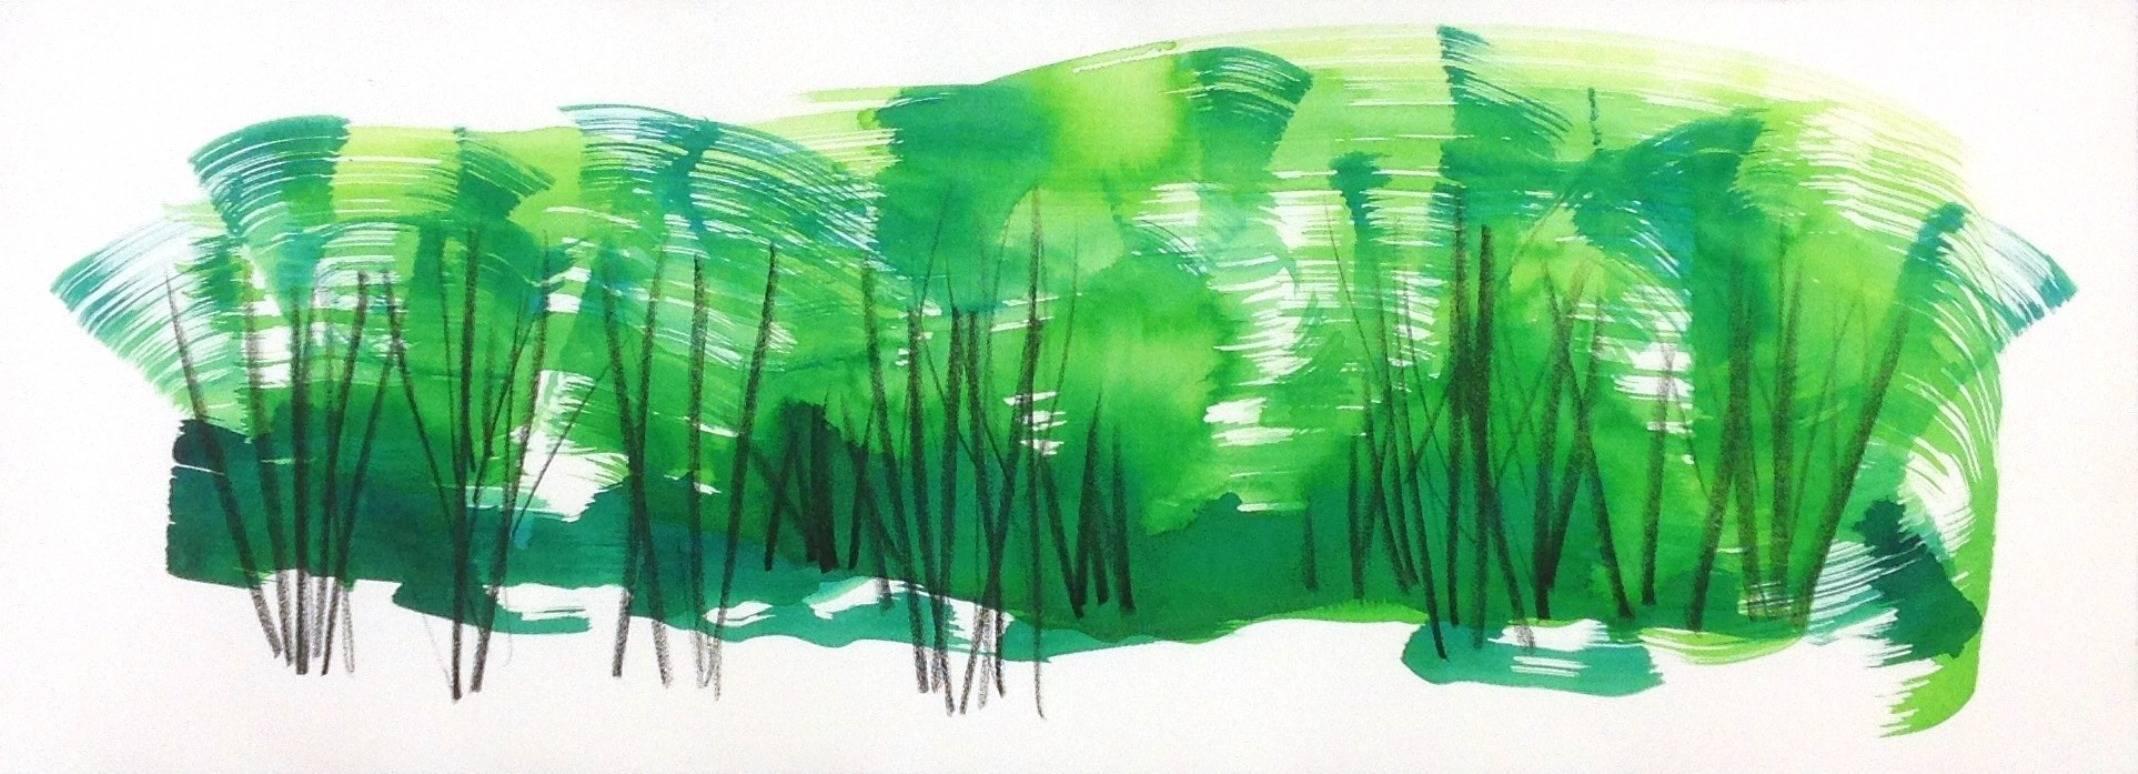 Bettina Mauel Landscape Painting - The Green Meadow 2